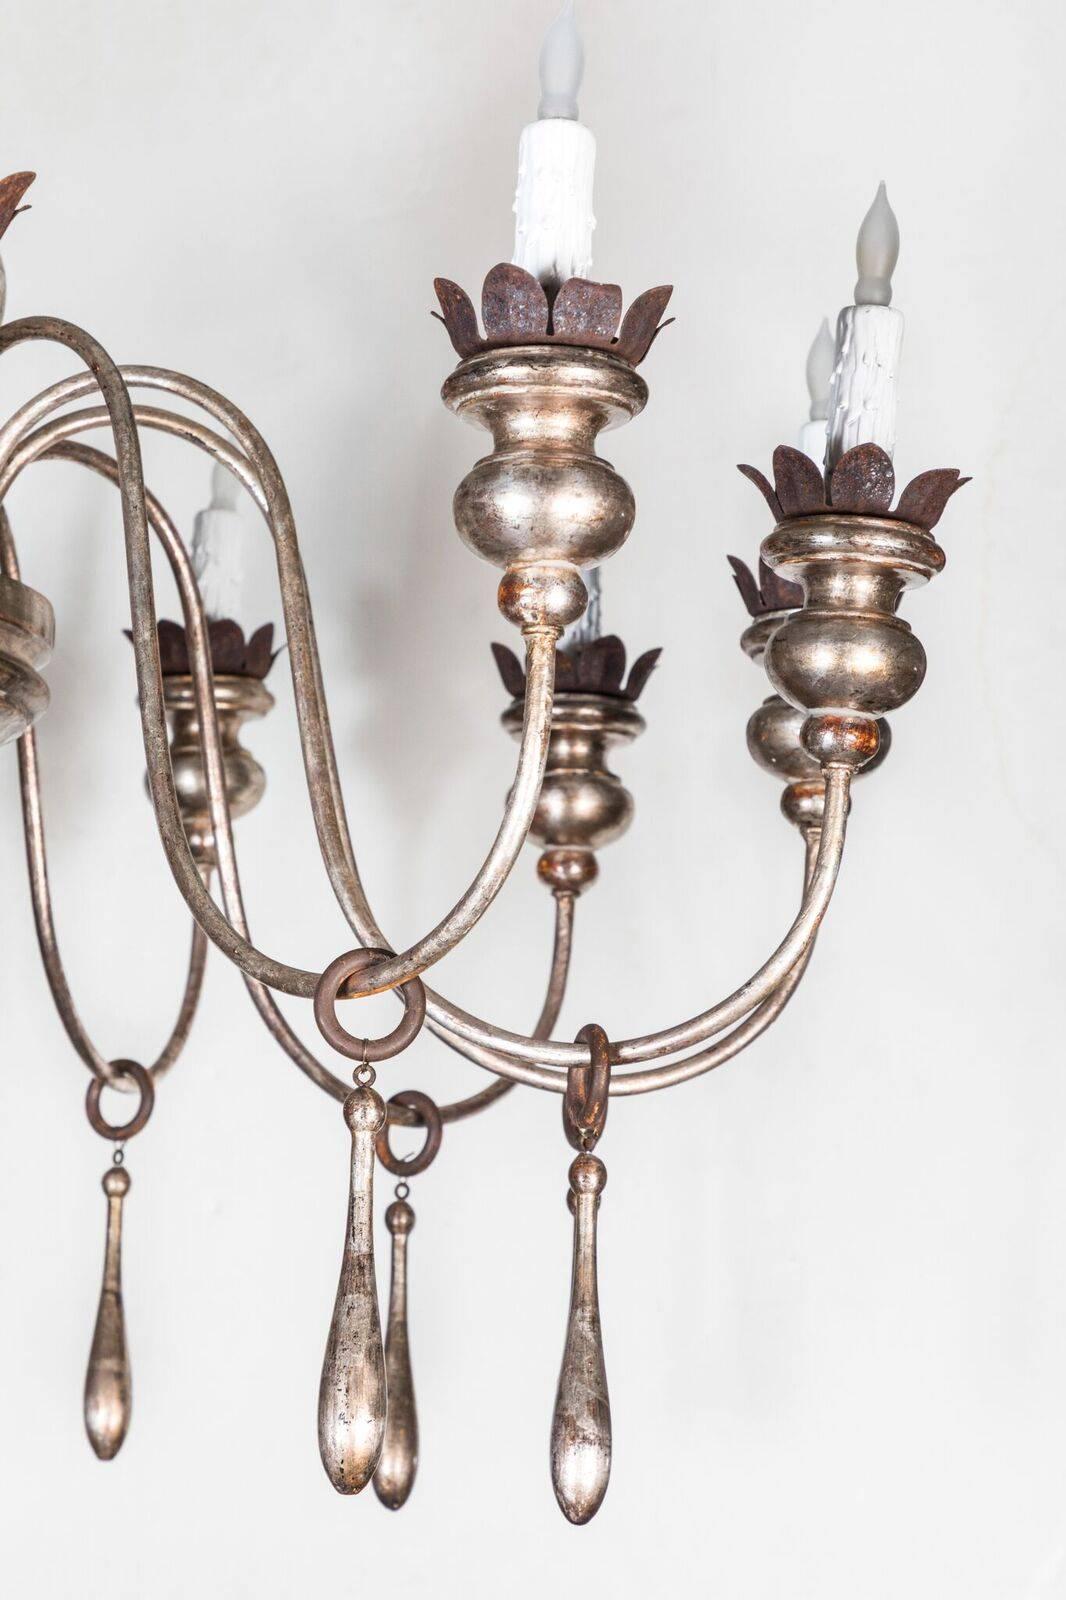 Twelve-light, carved-wood and metal Tuscan chandelier with tear-drop embellishments, in a gessoed and silver gilt finish.